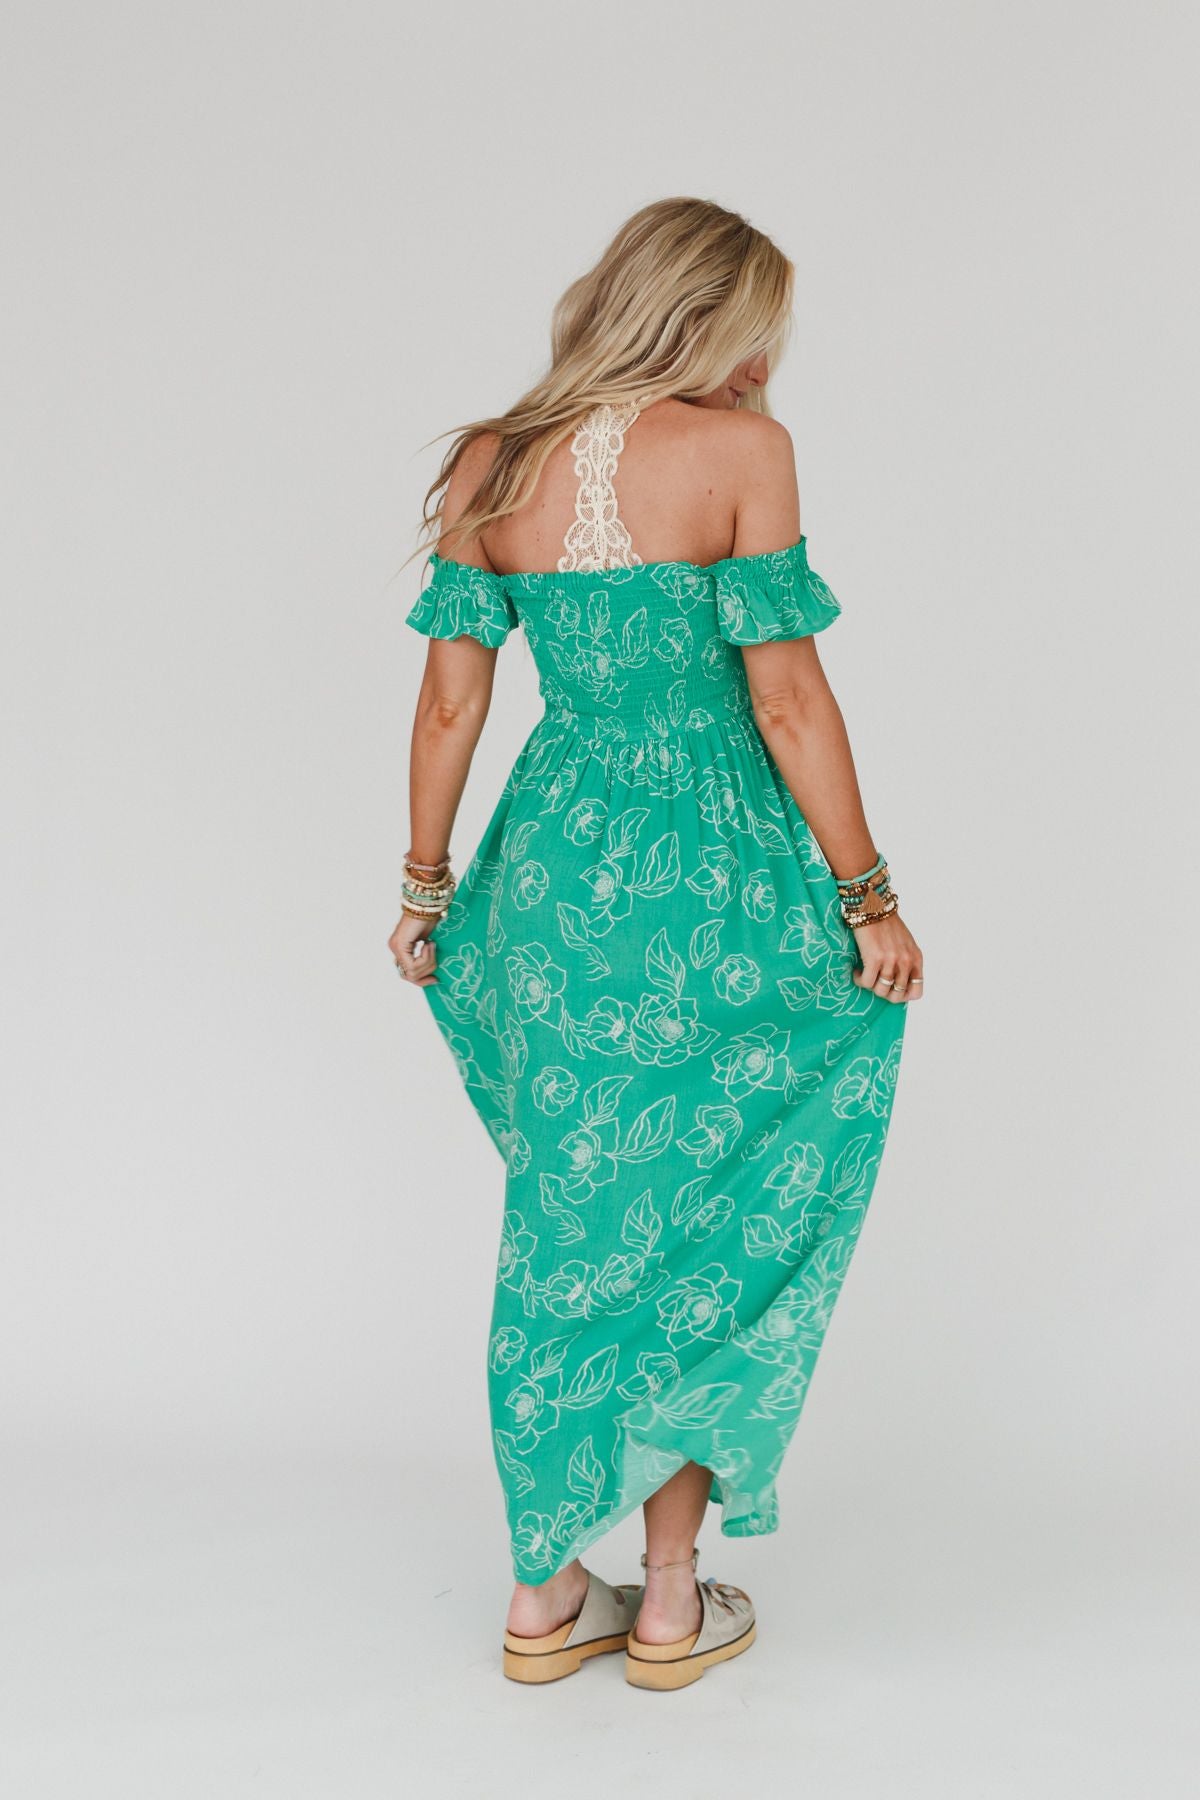 Blooming Love Off The Shoulder Maxi Dress - Green